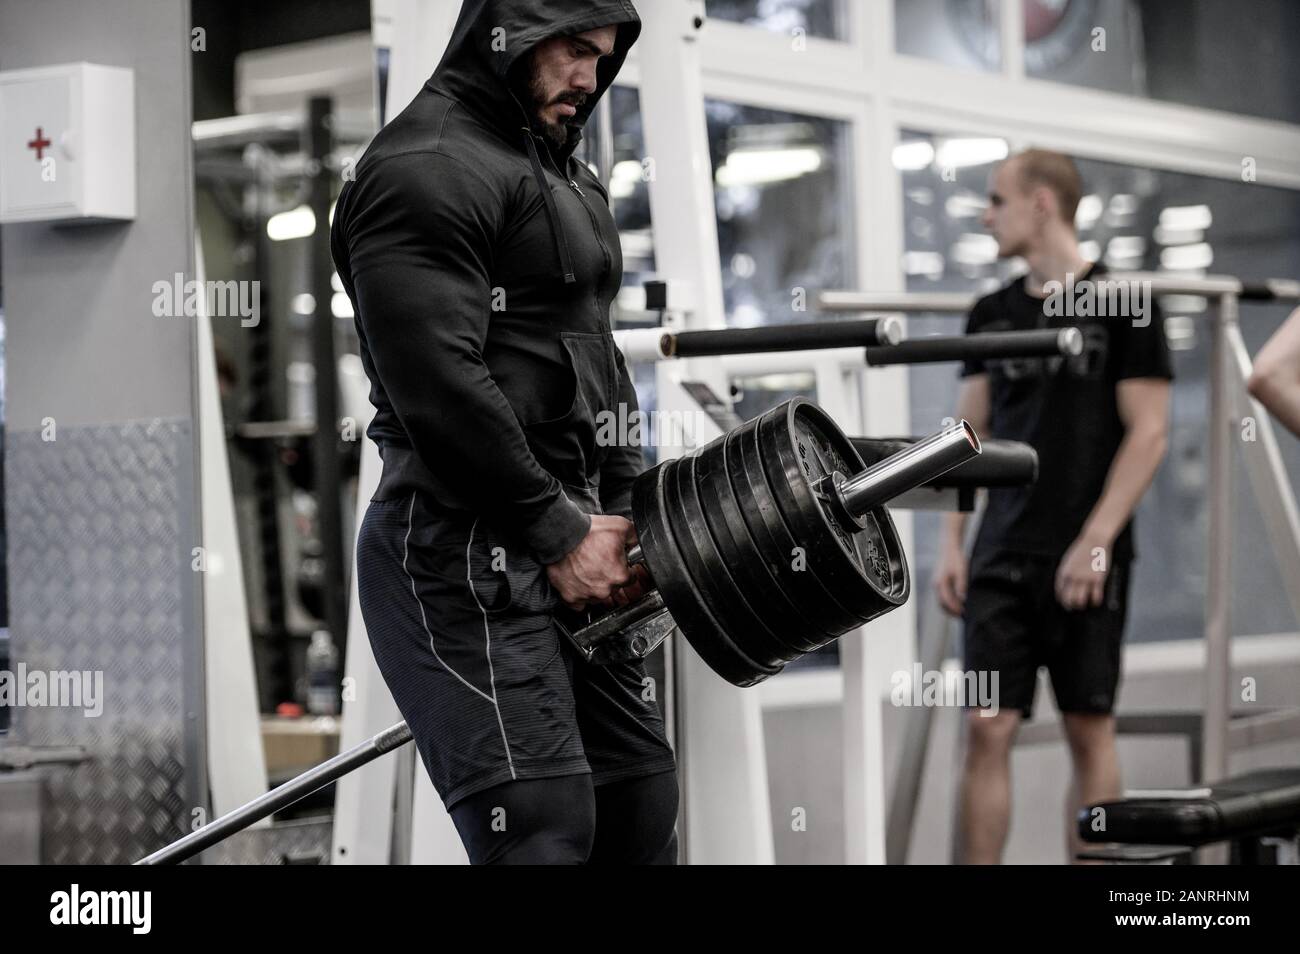 https://c8.alamy.com/comp/2ANRHNM/strong-bearded-man-in-hoodie-lifting-heavy-barbell-deadlift-among-people-indoors-gym-sport-training-workout-2ANRHNM.jpg